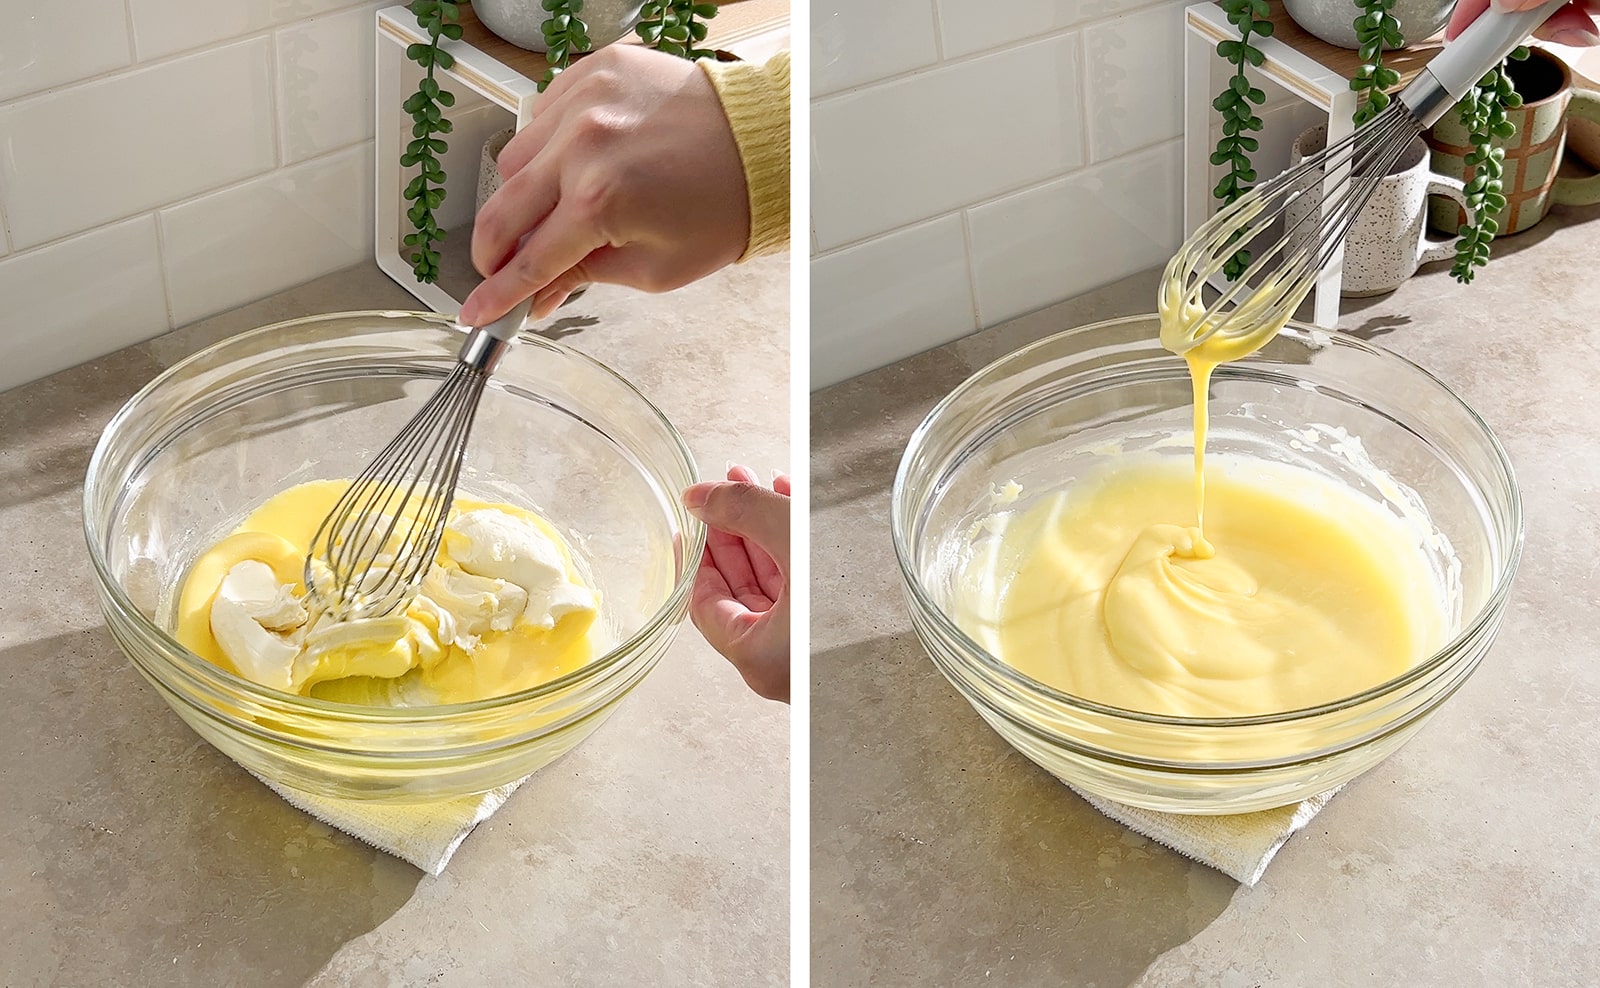 Left to right: whisking mascarpone cheese into warm egg mixture in bowl, egg mixture dripping off whisk into mixing bowl.